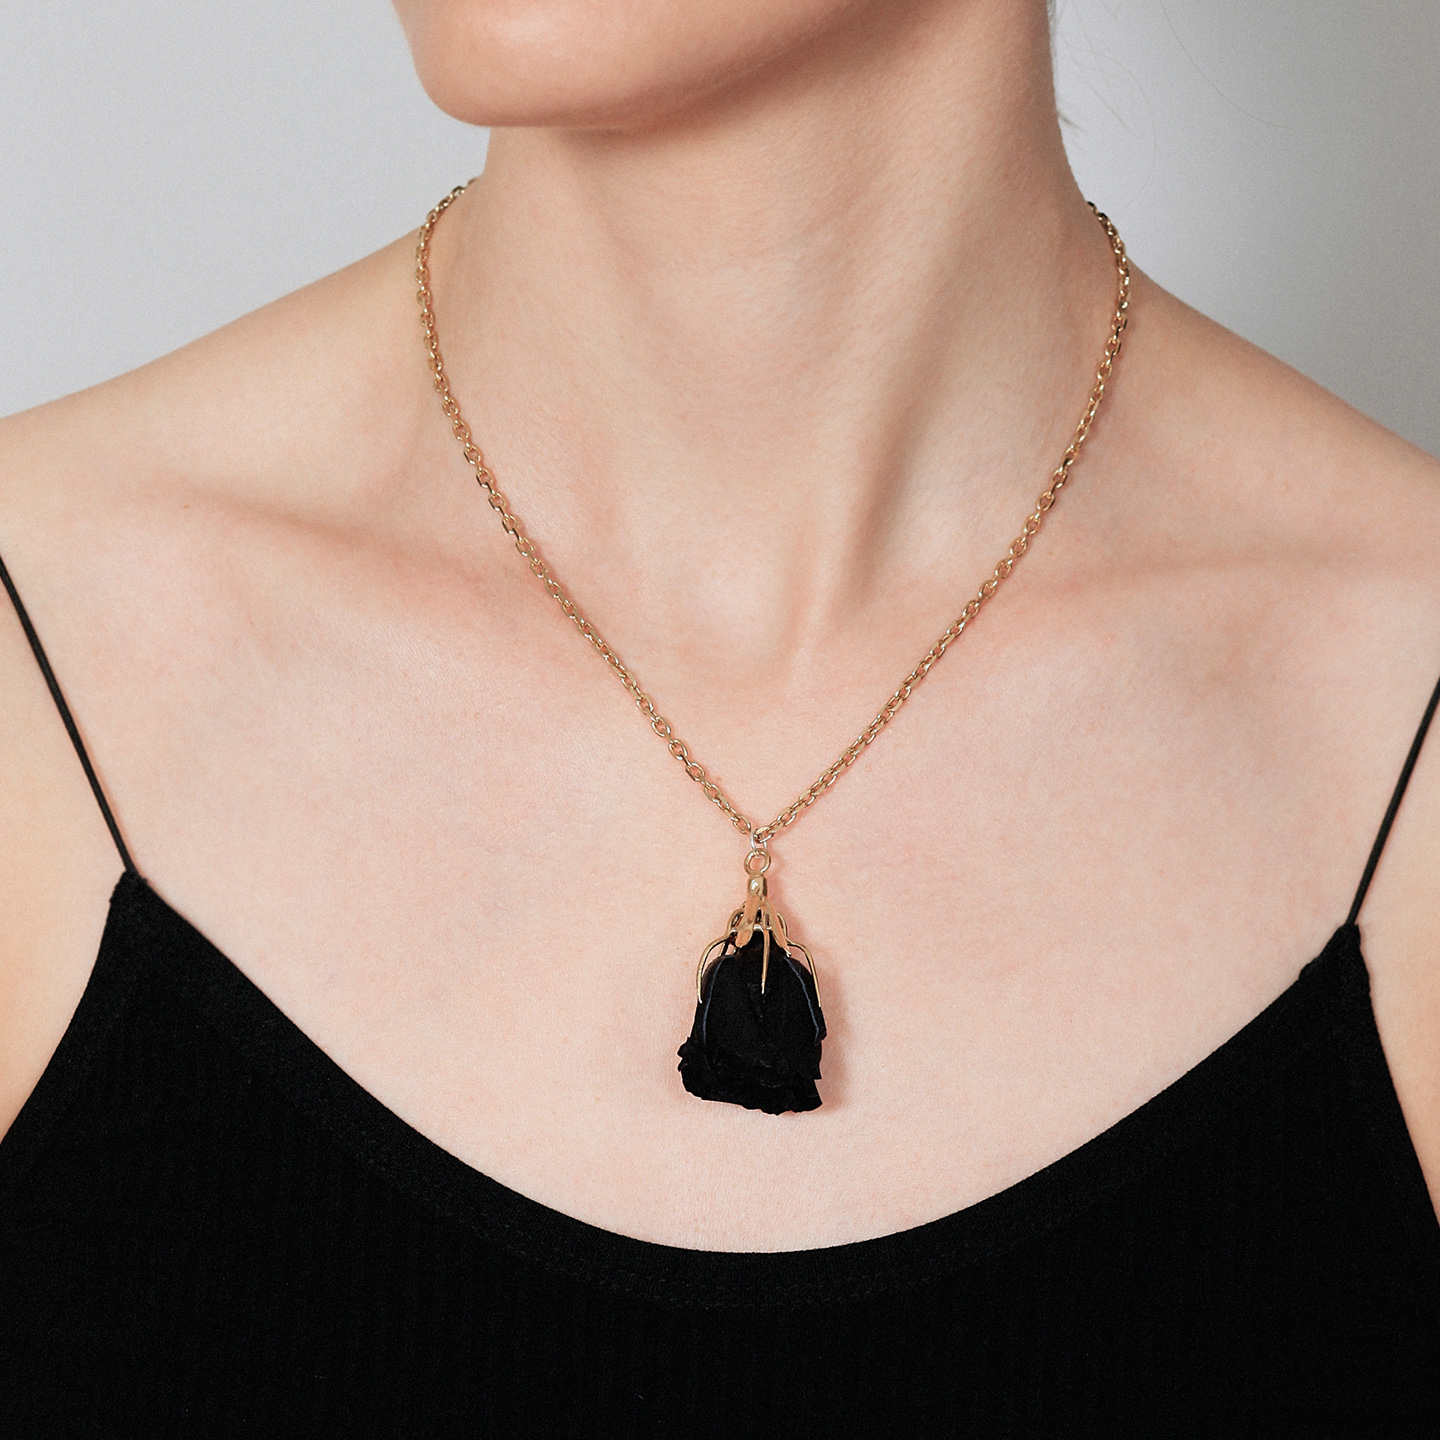 Gold necklace with natural black rose